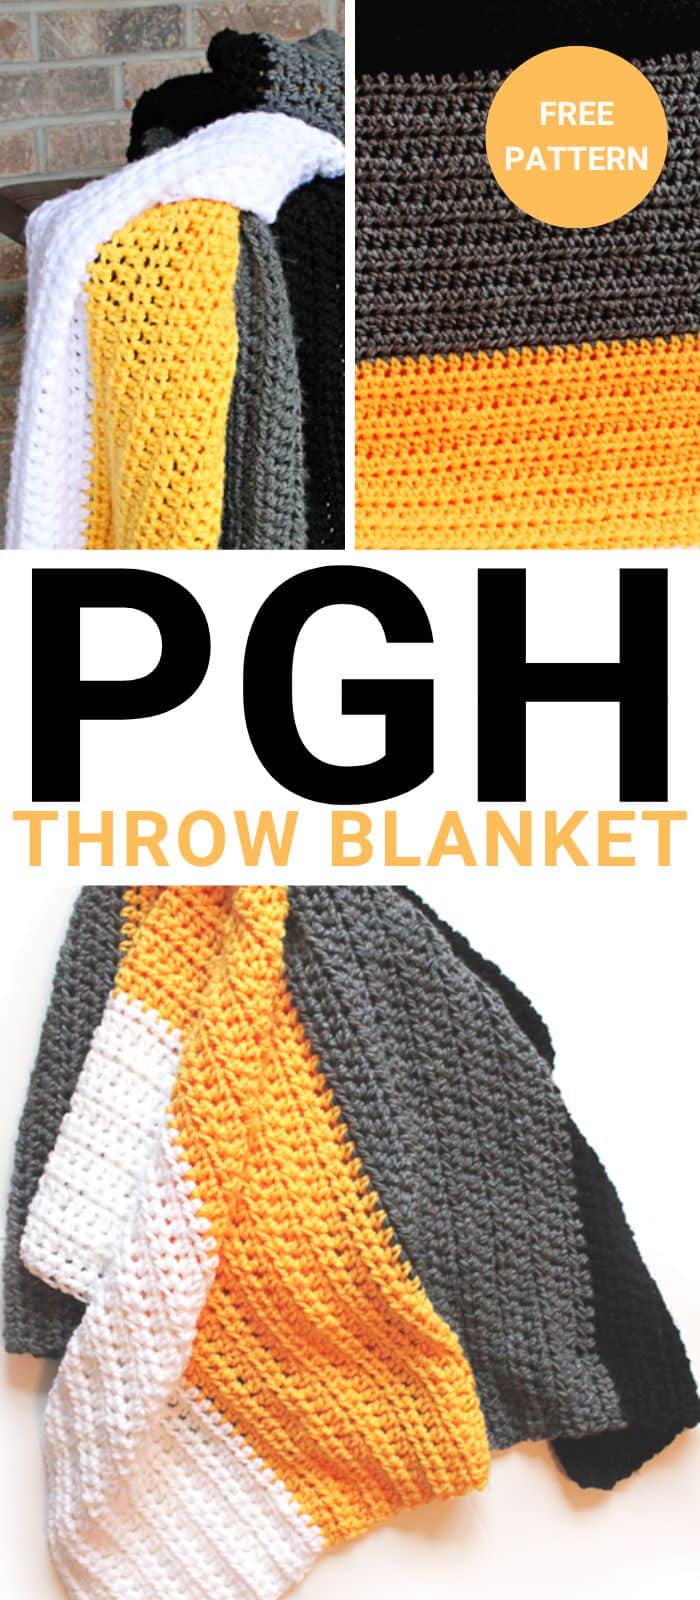 free pattern for a pittsburgh colored crochet blanket